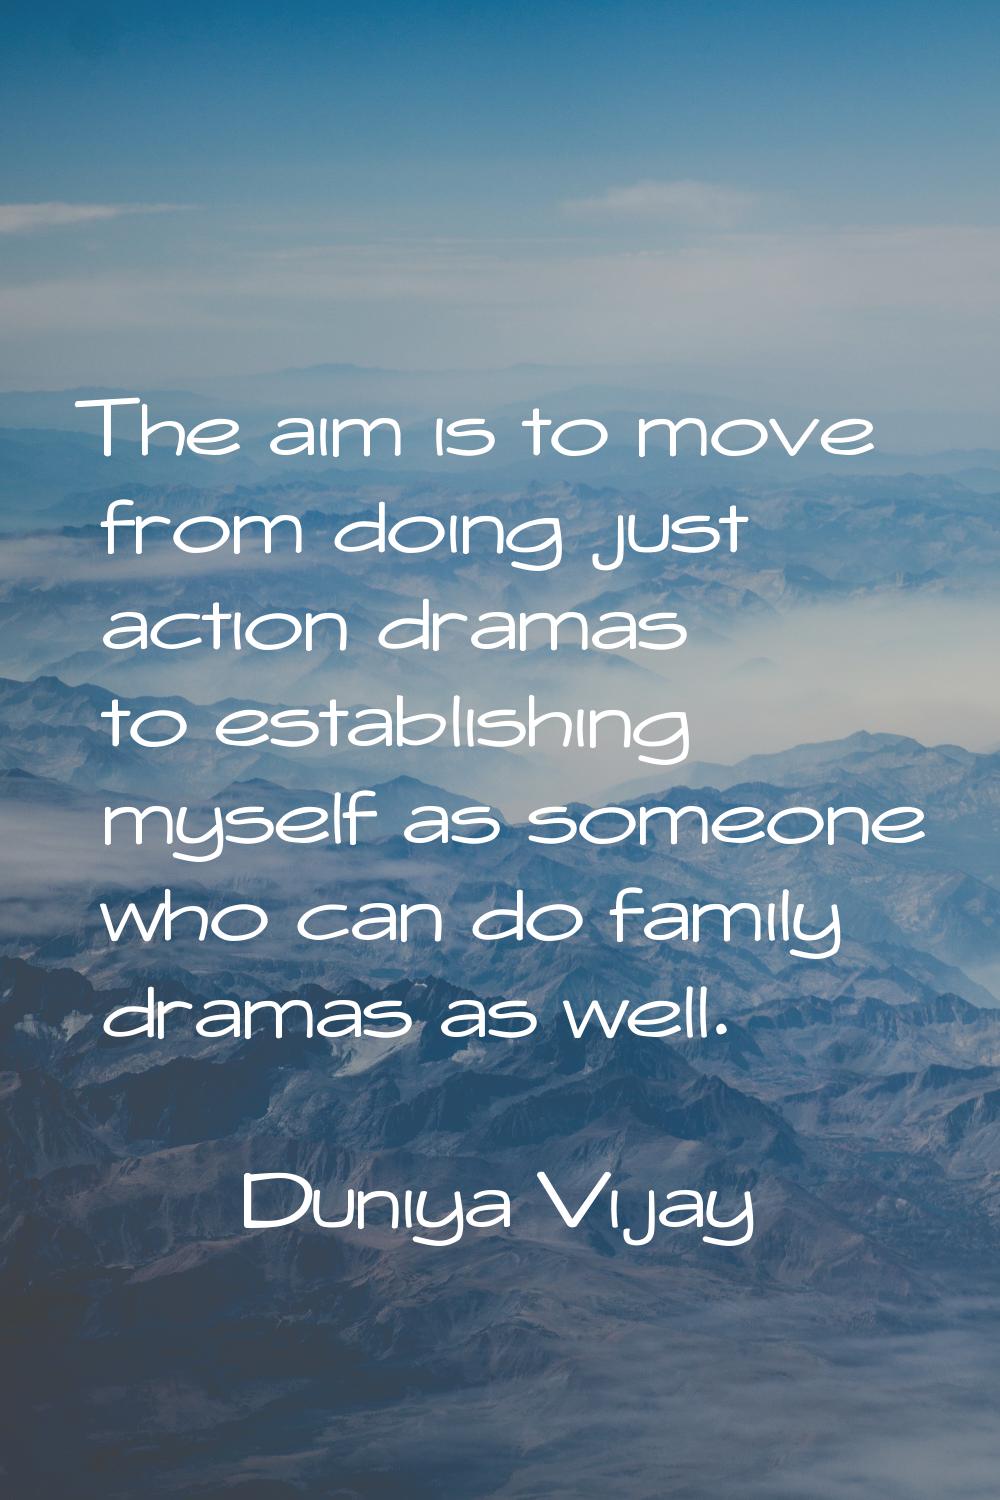 The aim is to move from doing just action dramas to establishing myself as someone who can do famil